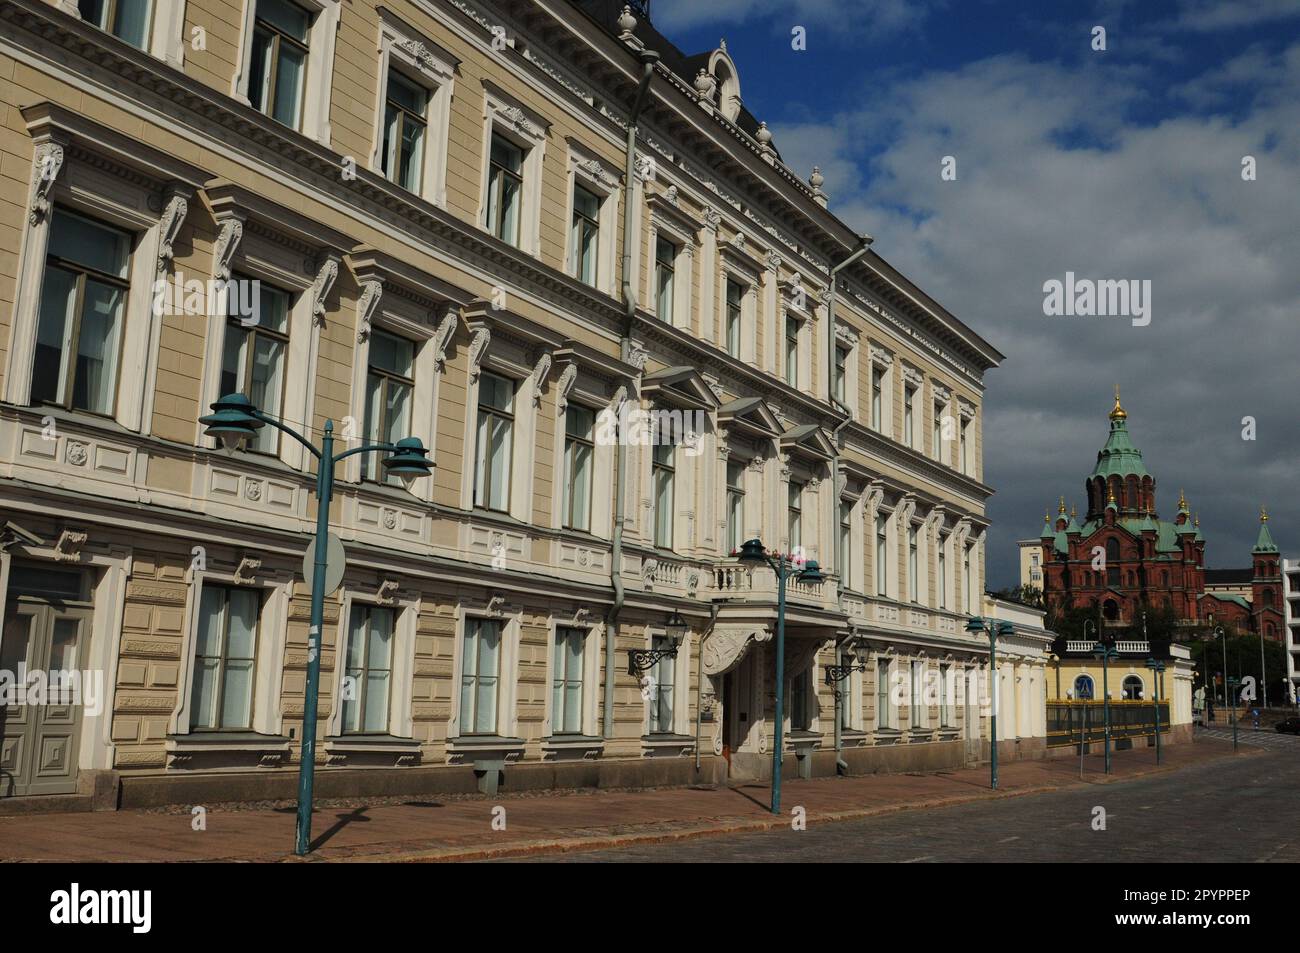 Presidential Palace And Uspenski Church In Helsinki Finland On A Beautiful Sunny Summer Day With A Clear Blue Sky Stock Photo